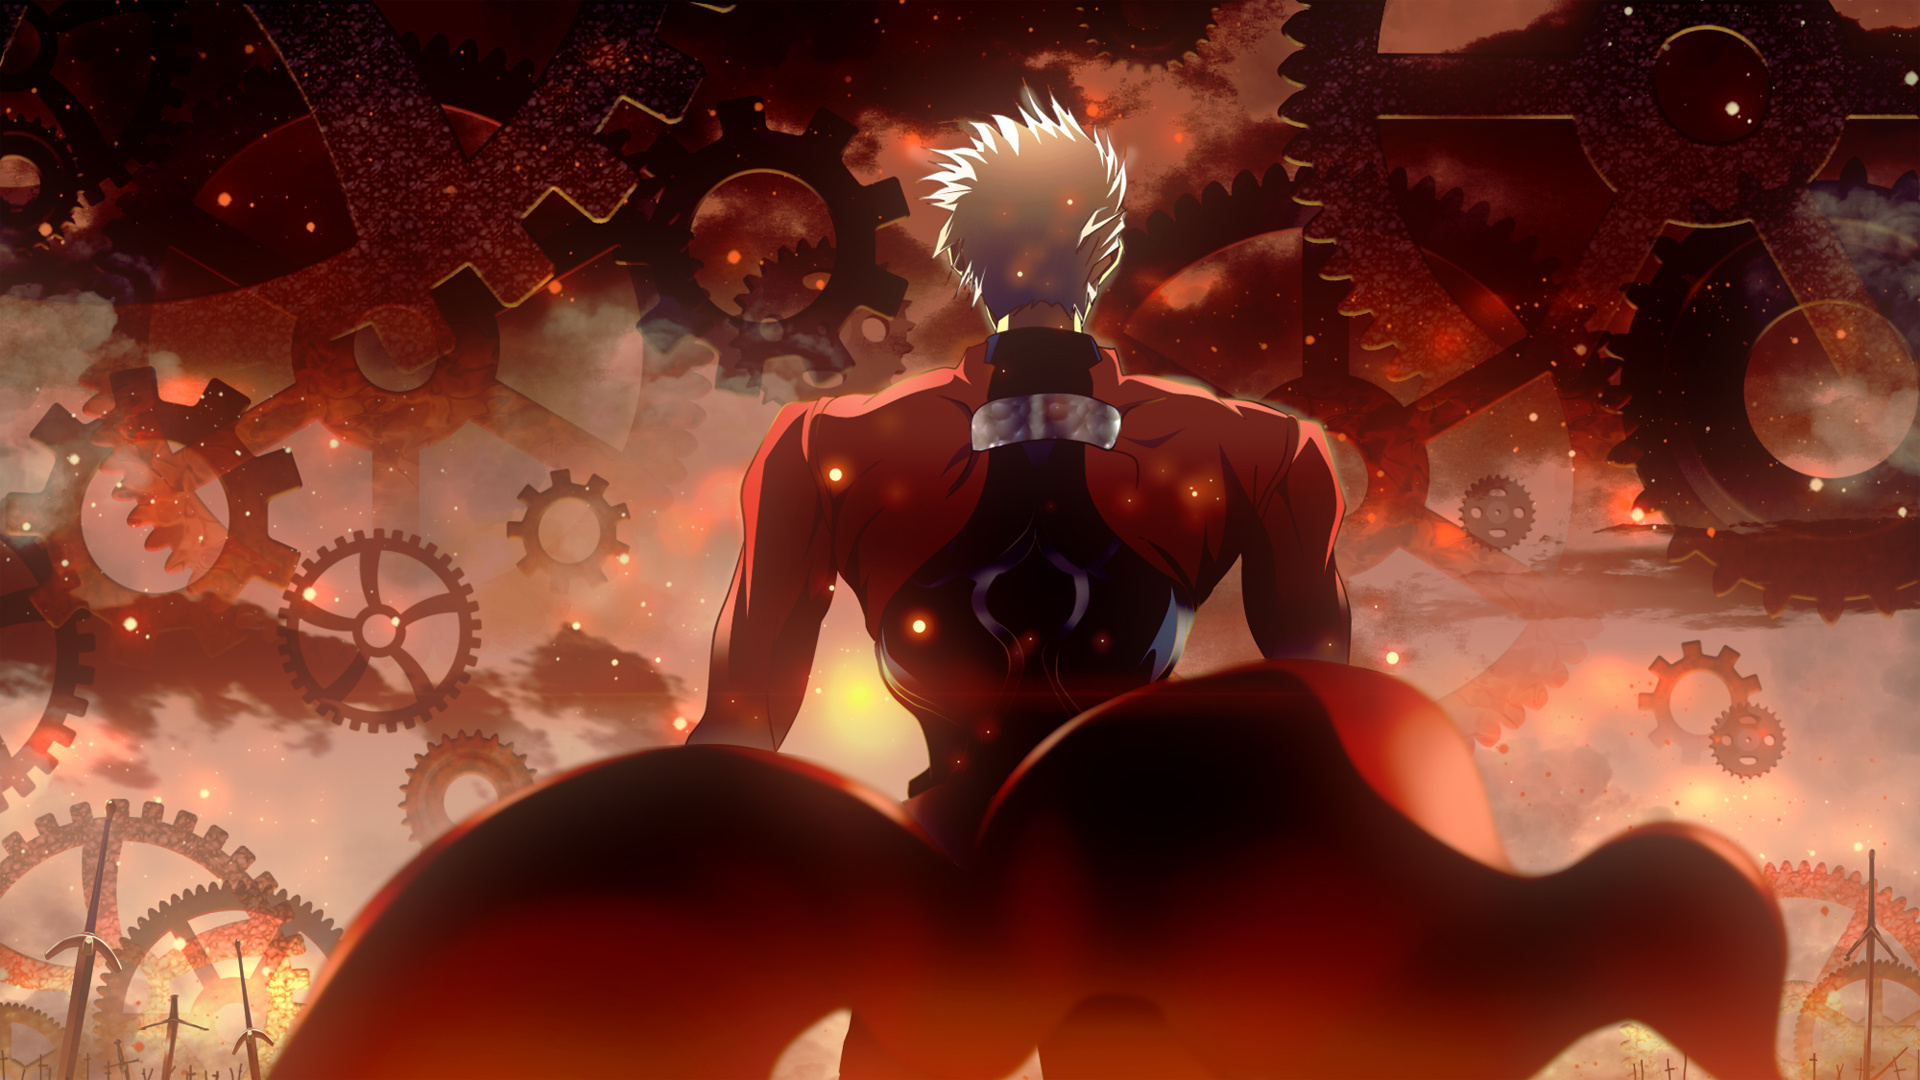 Fate/stay night, Anime action-packed, Unlimited Blade Works, Mythical battles, 1920x1080 Full HD Desktop